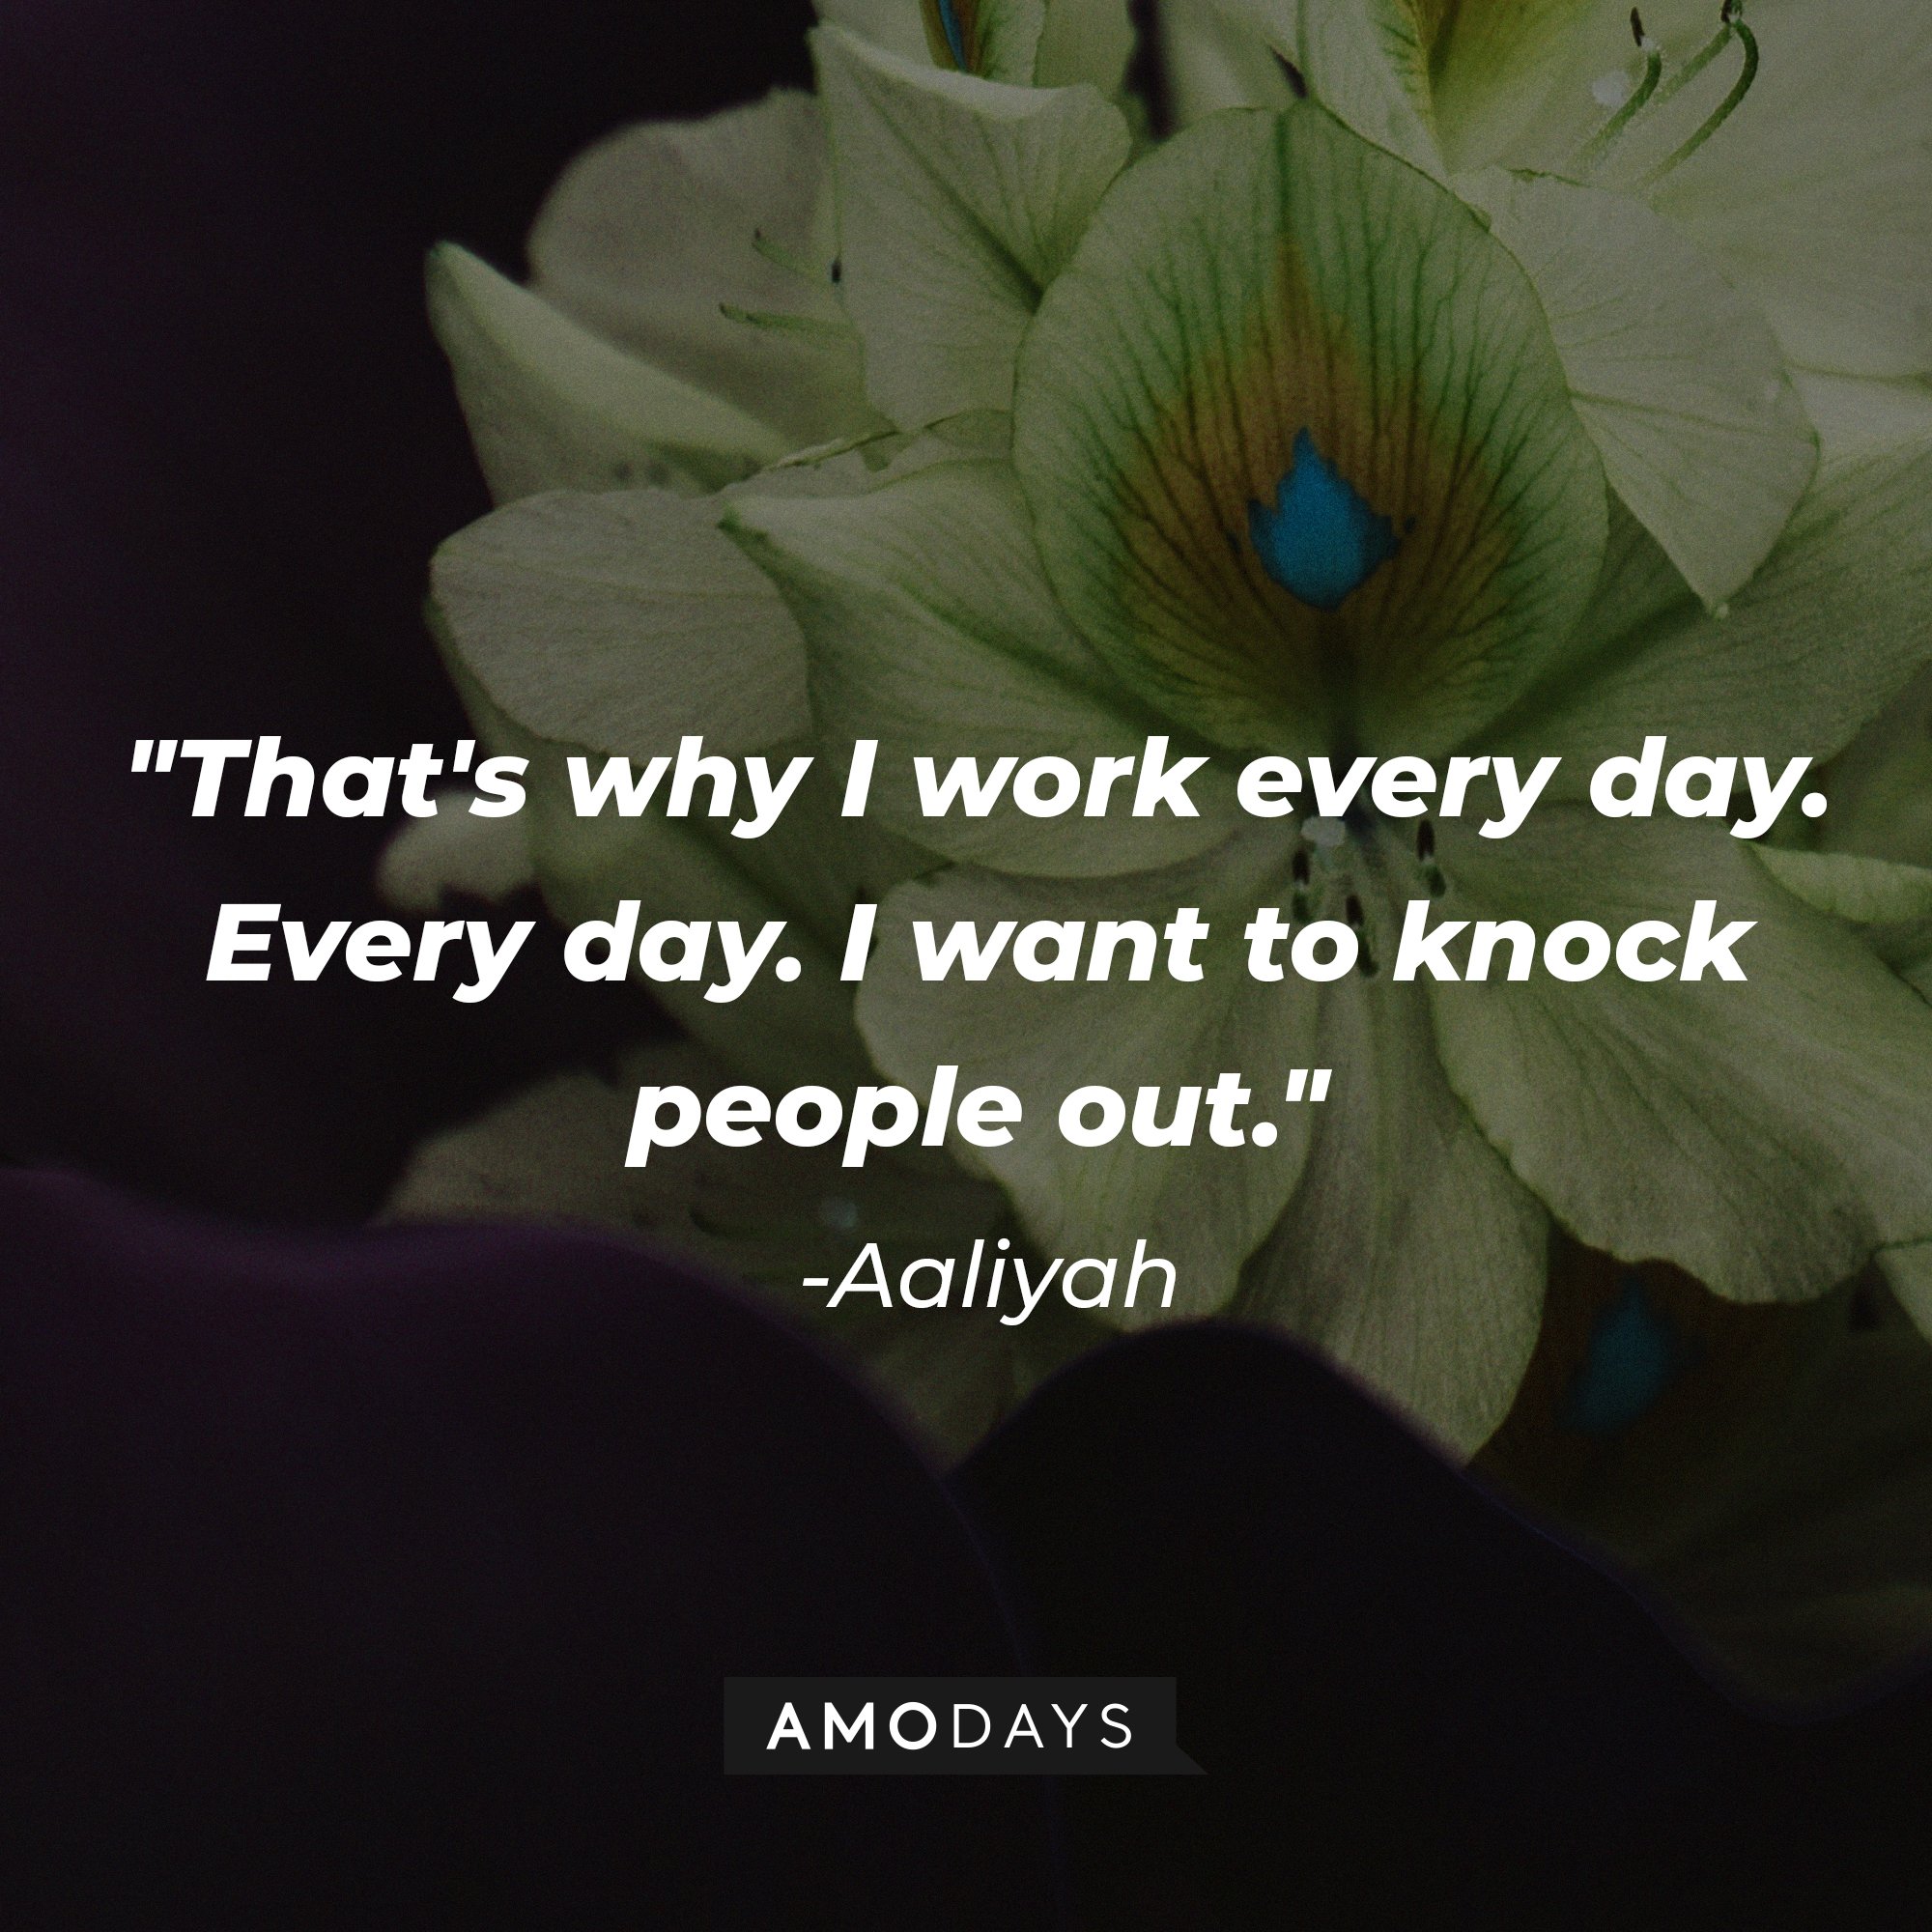 Aaliyah’s quote: "That's why I work every day. Every day. I want to knock people out." | Image: AmoDays